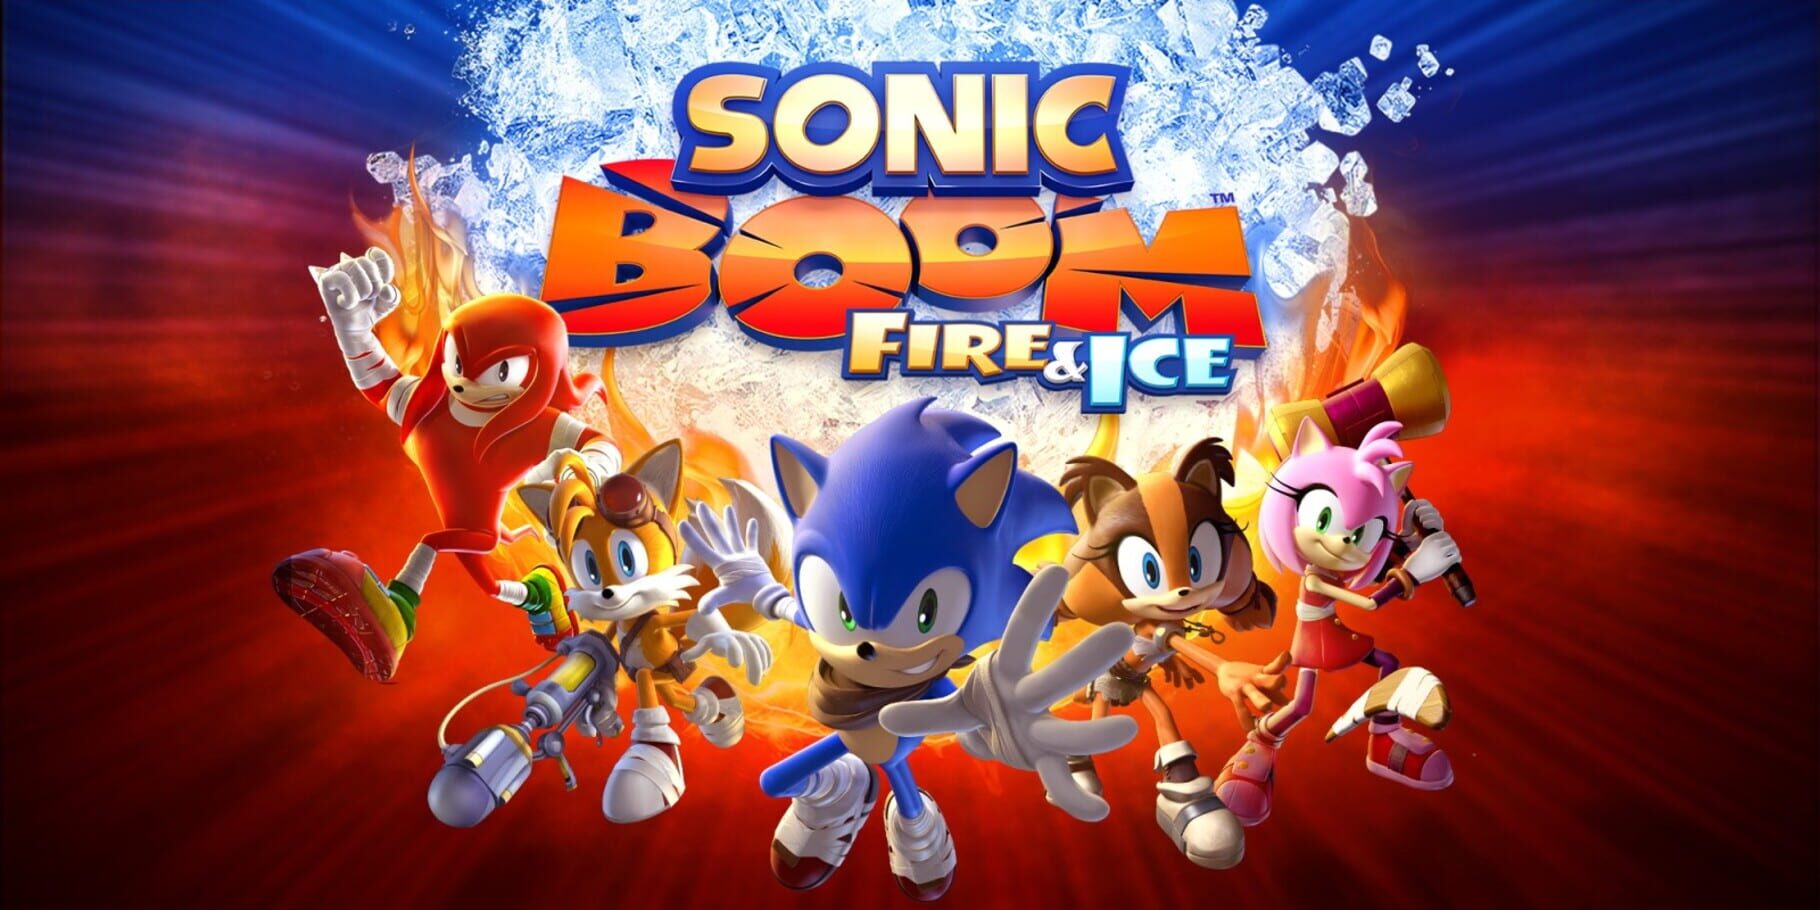 Artwork for Sonic Boom: Fire & Ice